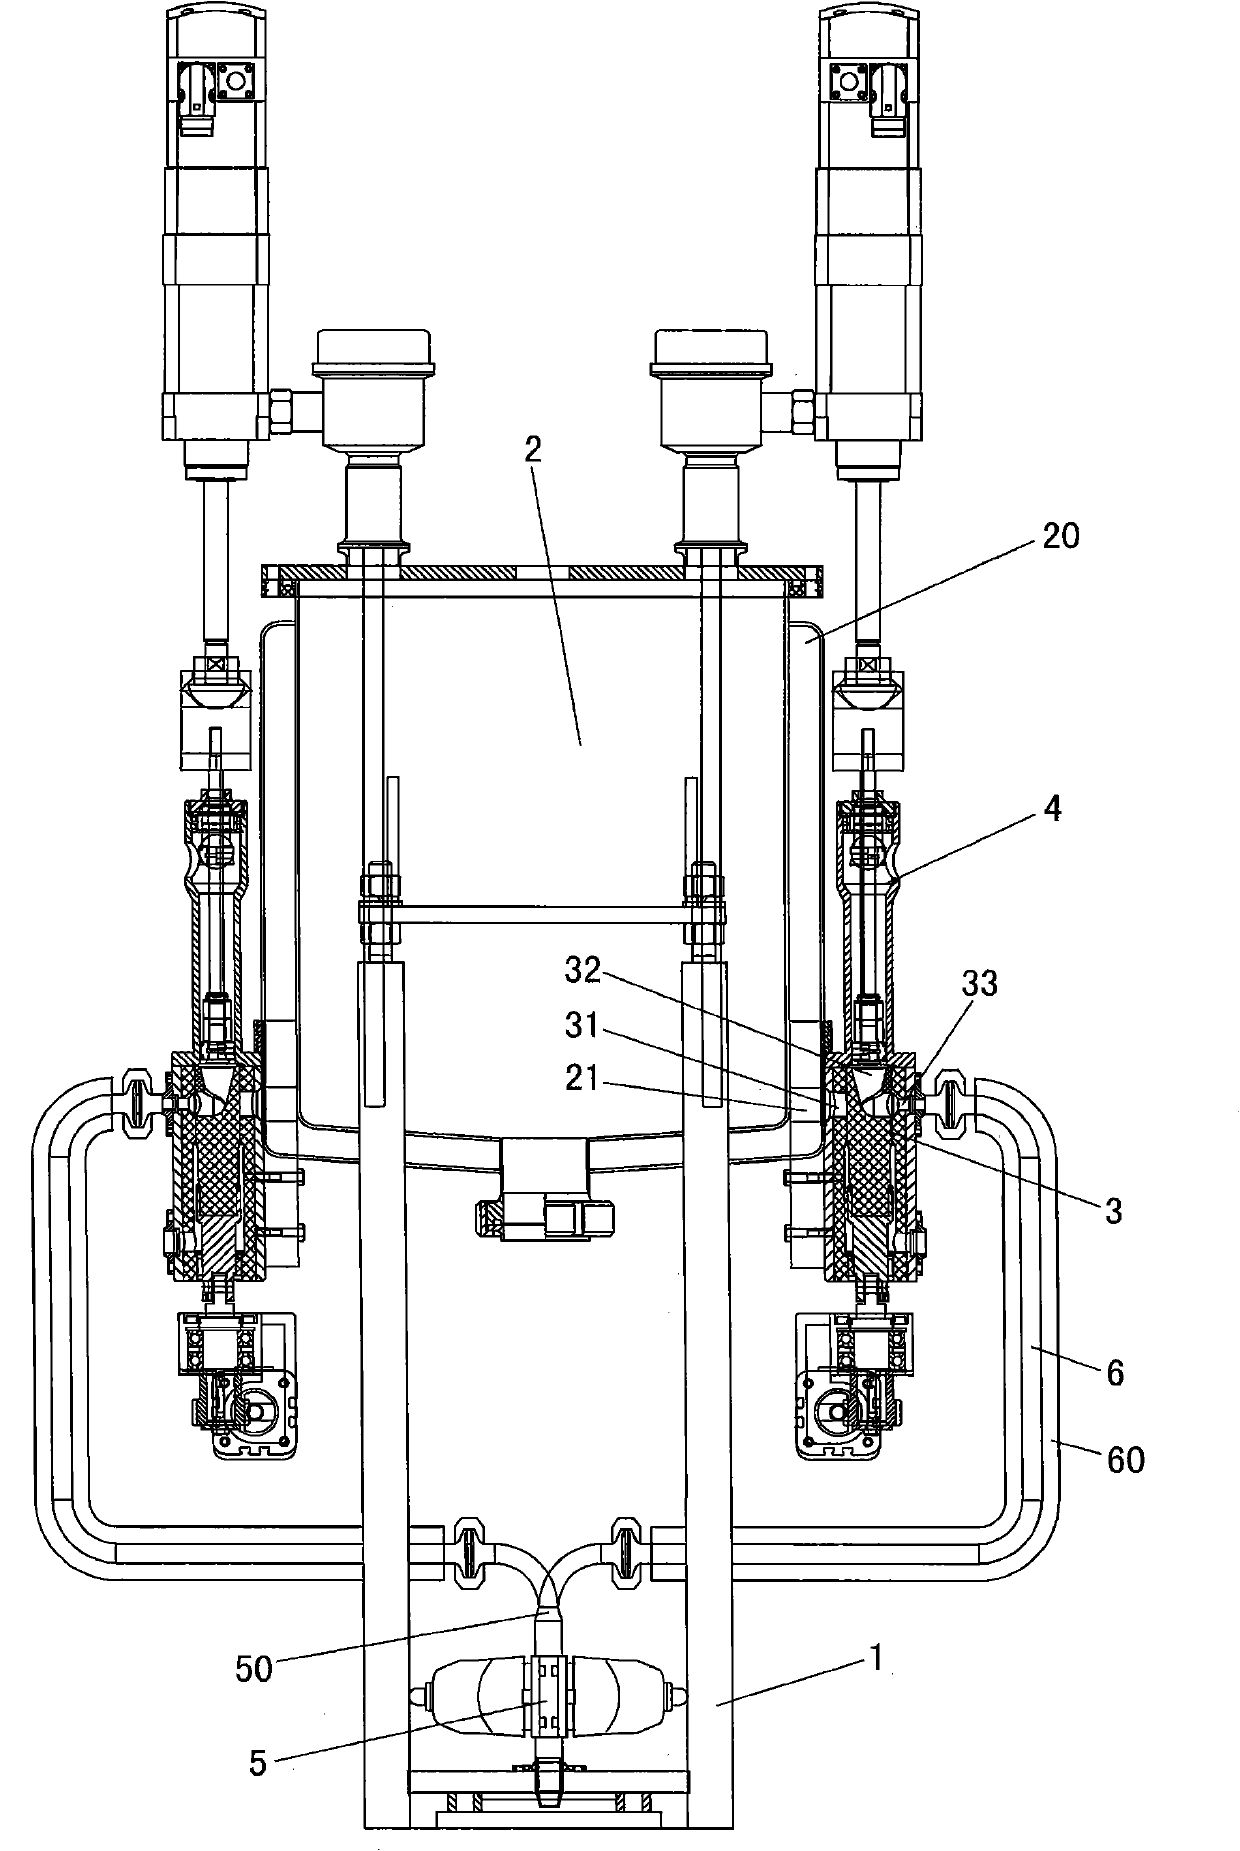 Filling device capable of filling high-temperature and high-viscosity materials